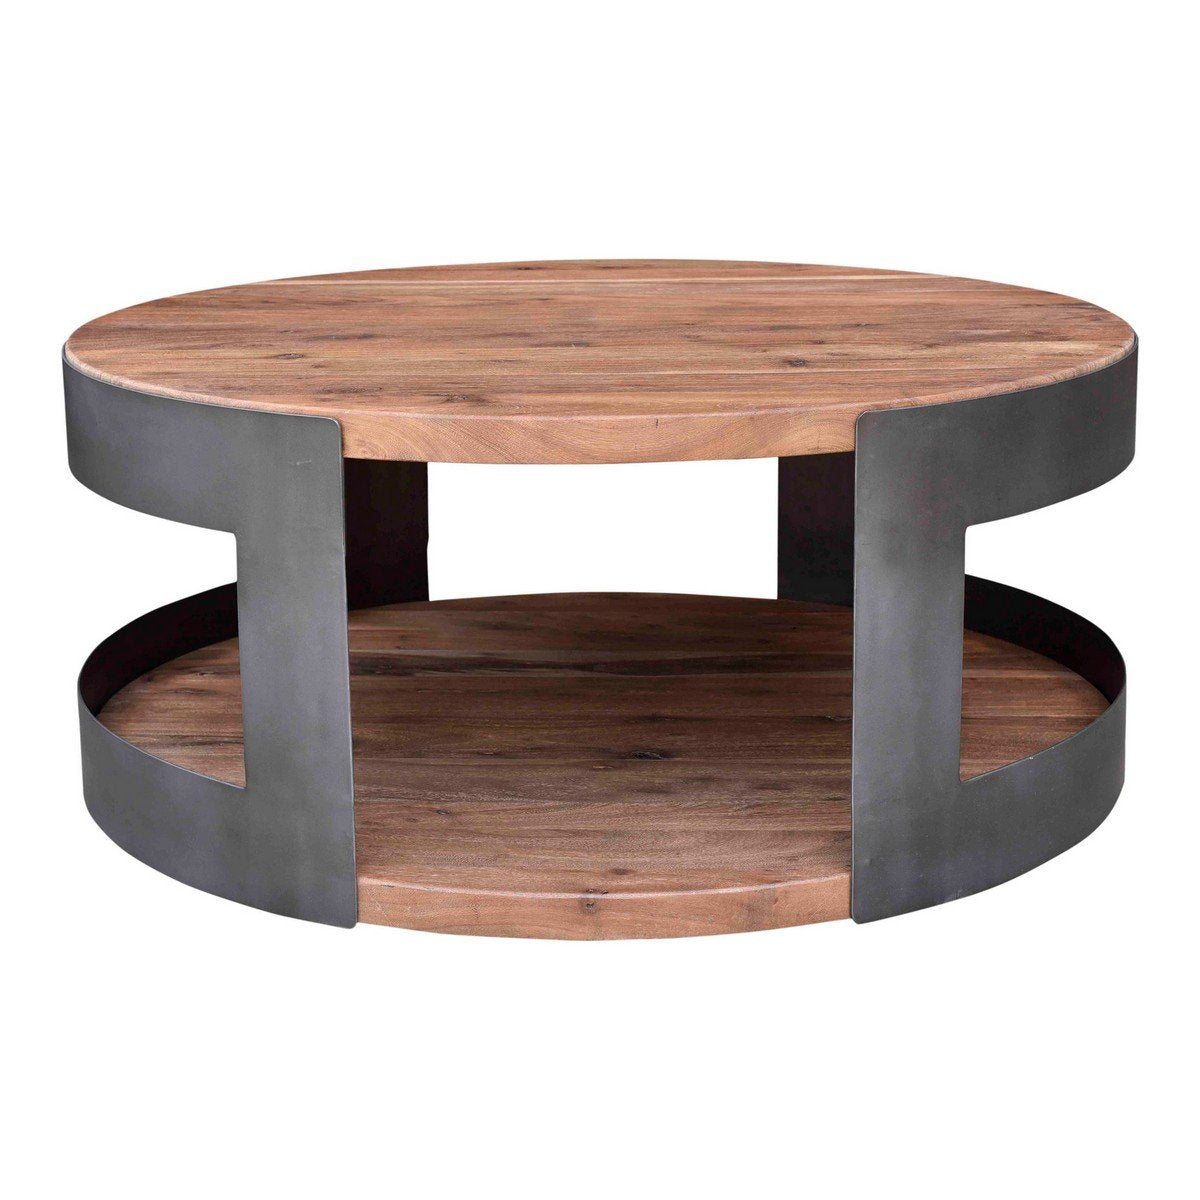 Moe's Home Collection April Coffee Table - VE-1034-03 - Moe's Home Collection - Coffee Tables - Minimal And Modern - 1